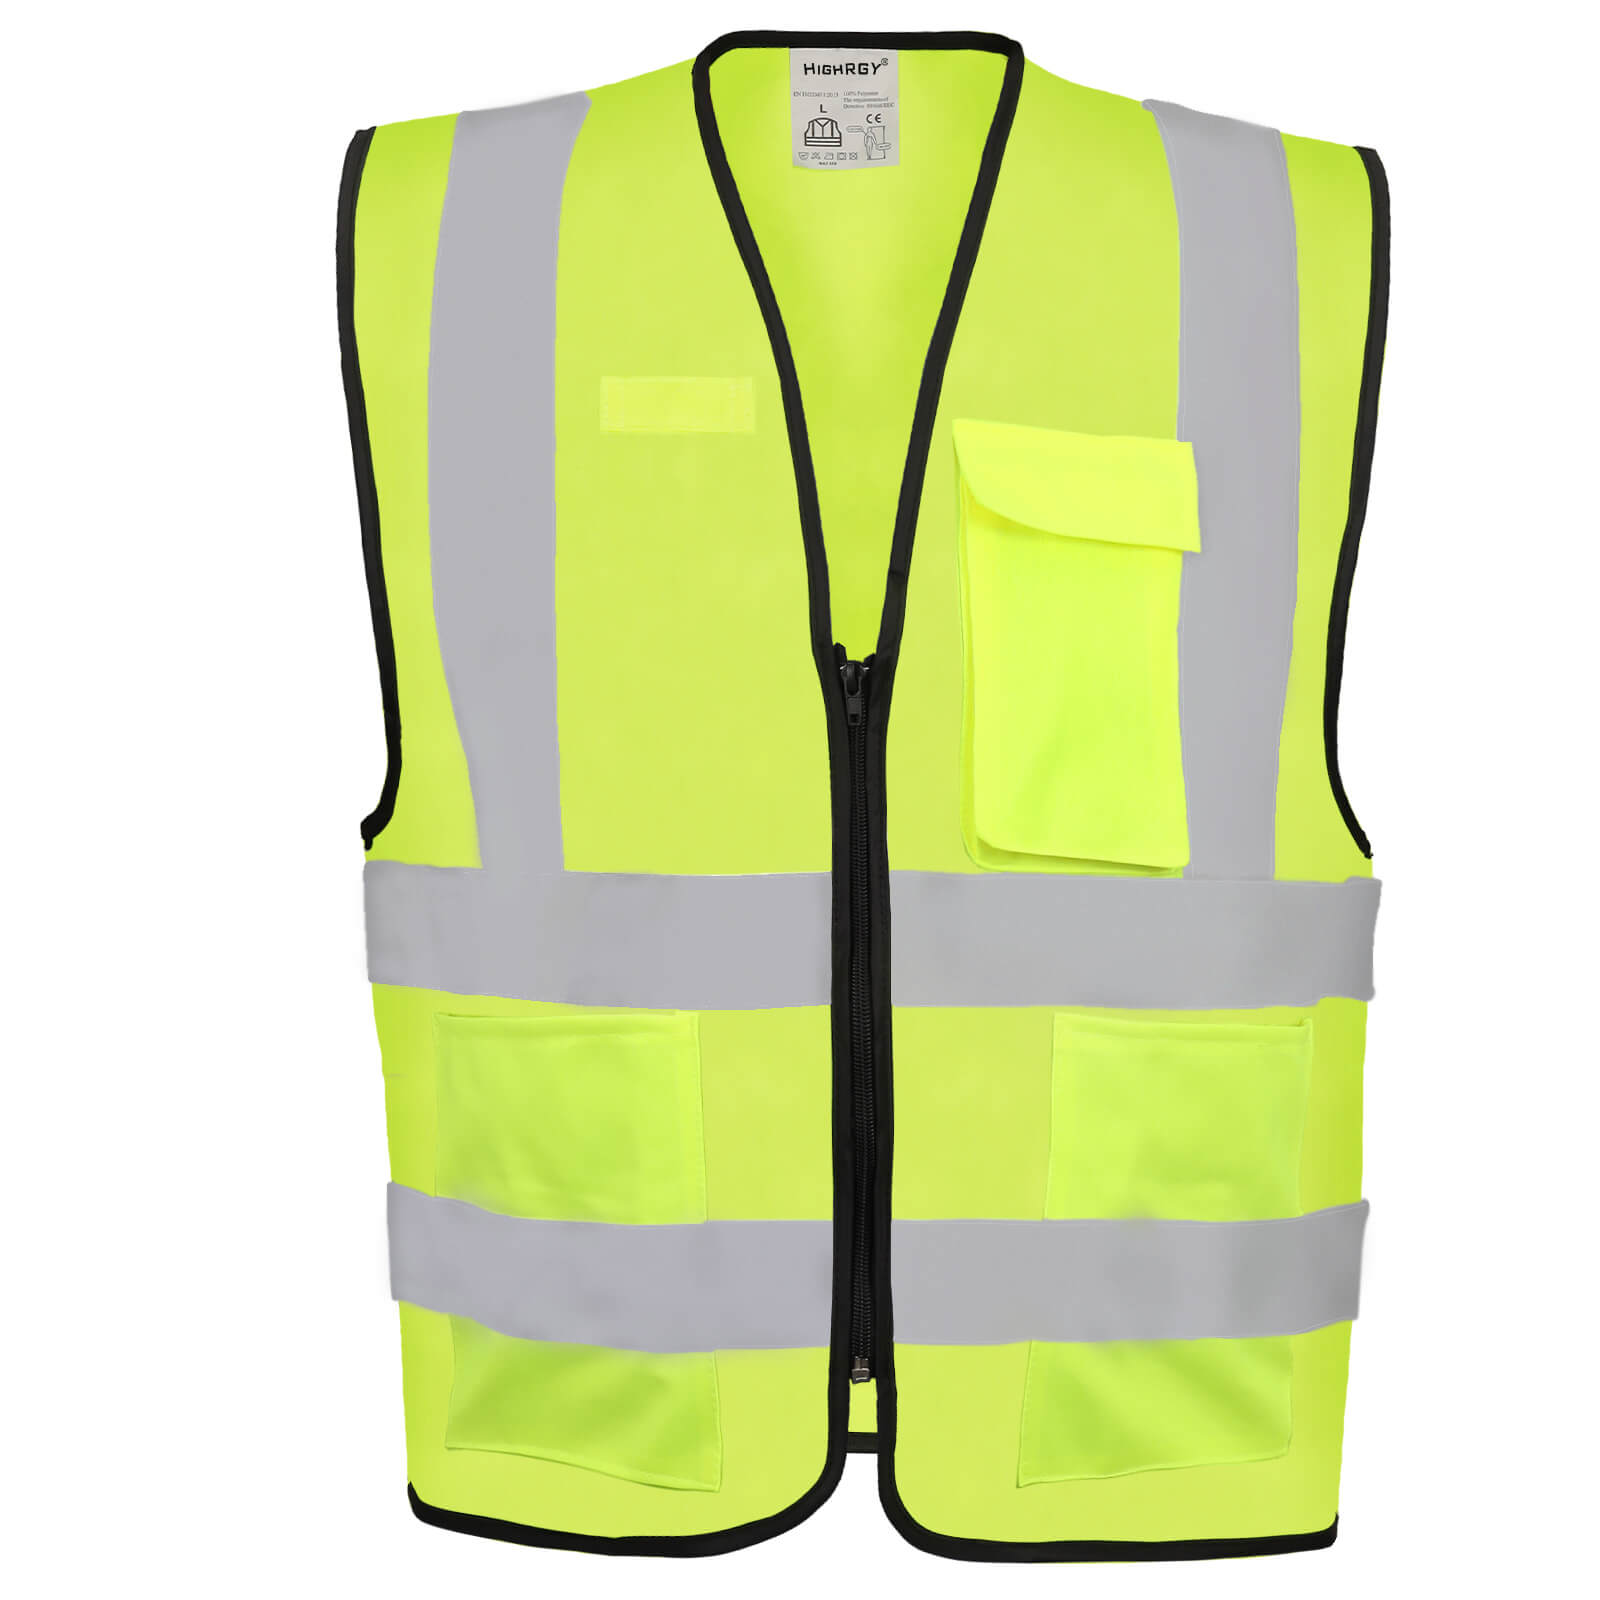 HIGH VISIBILITY SAFETY VEST-9 YELLOW - Protective Equipment,Workwear ...